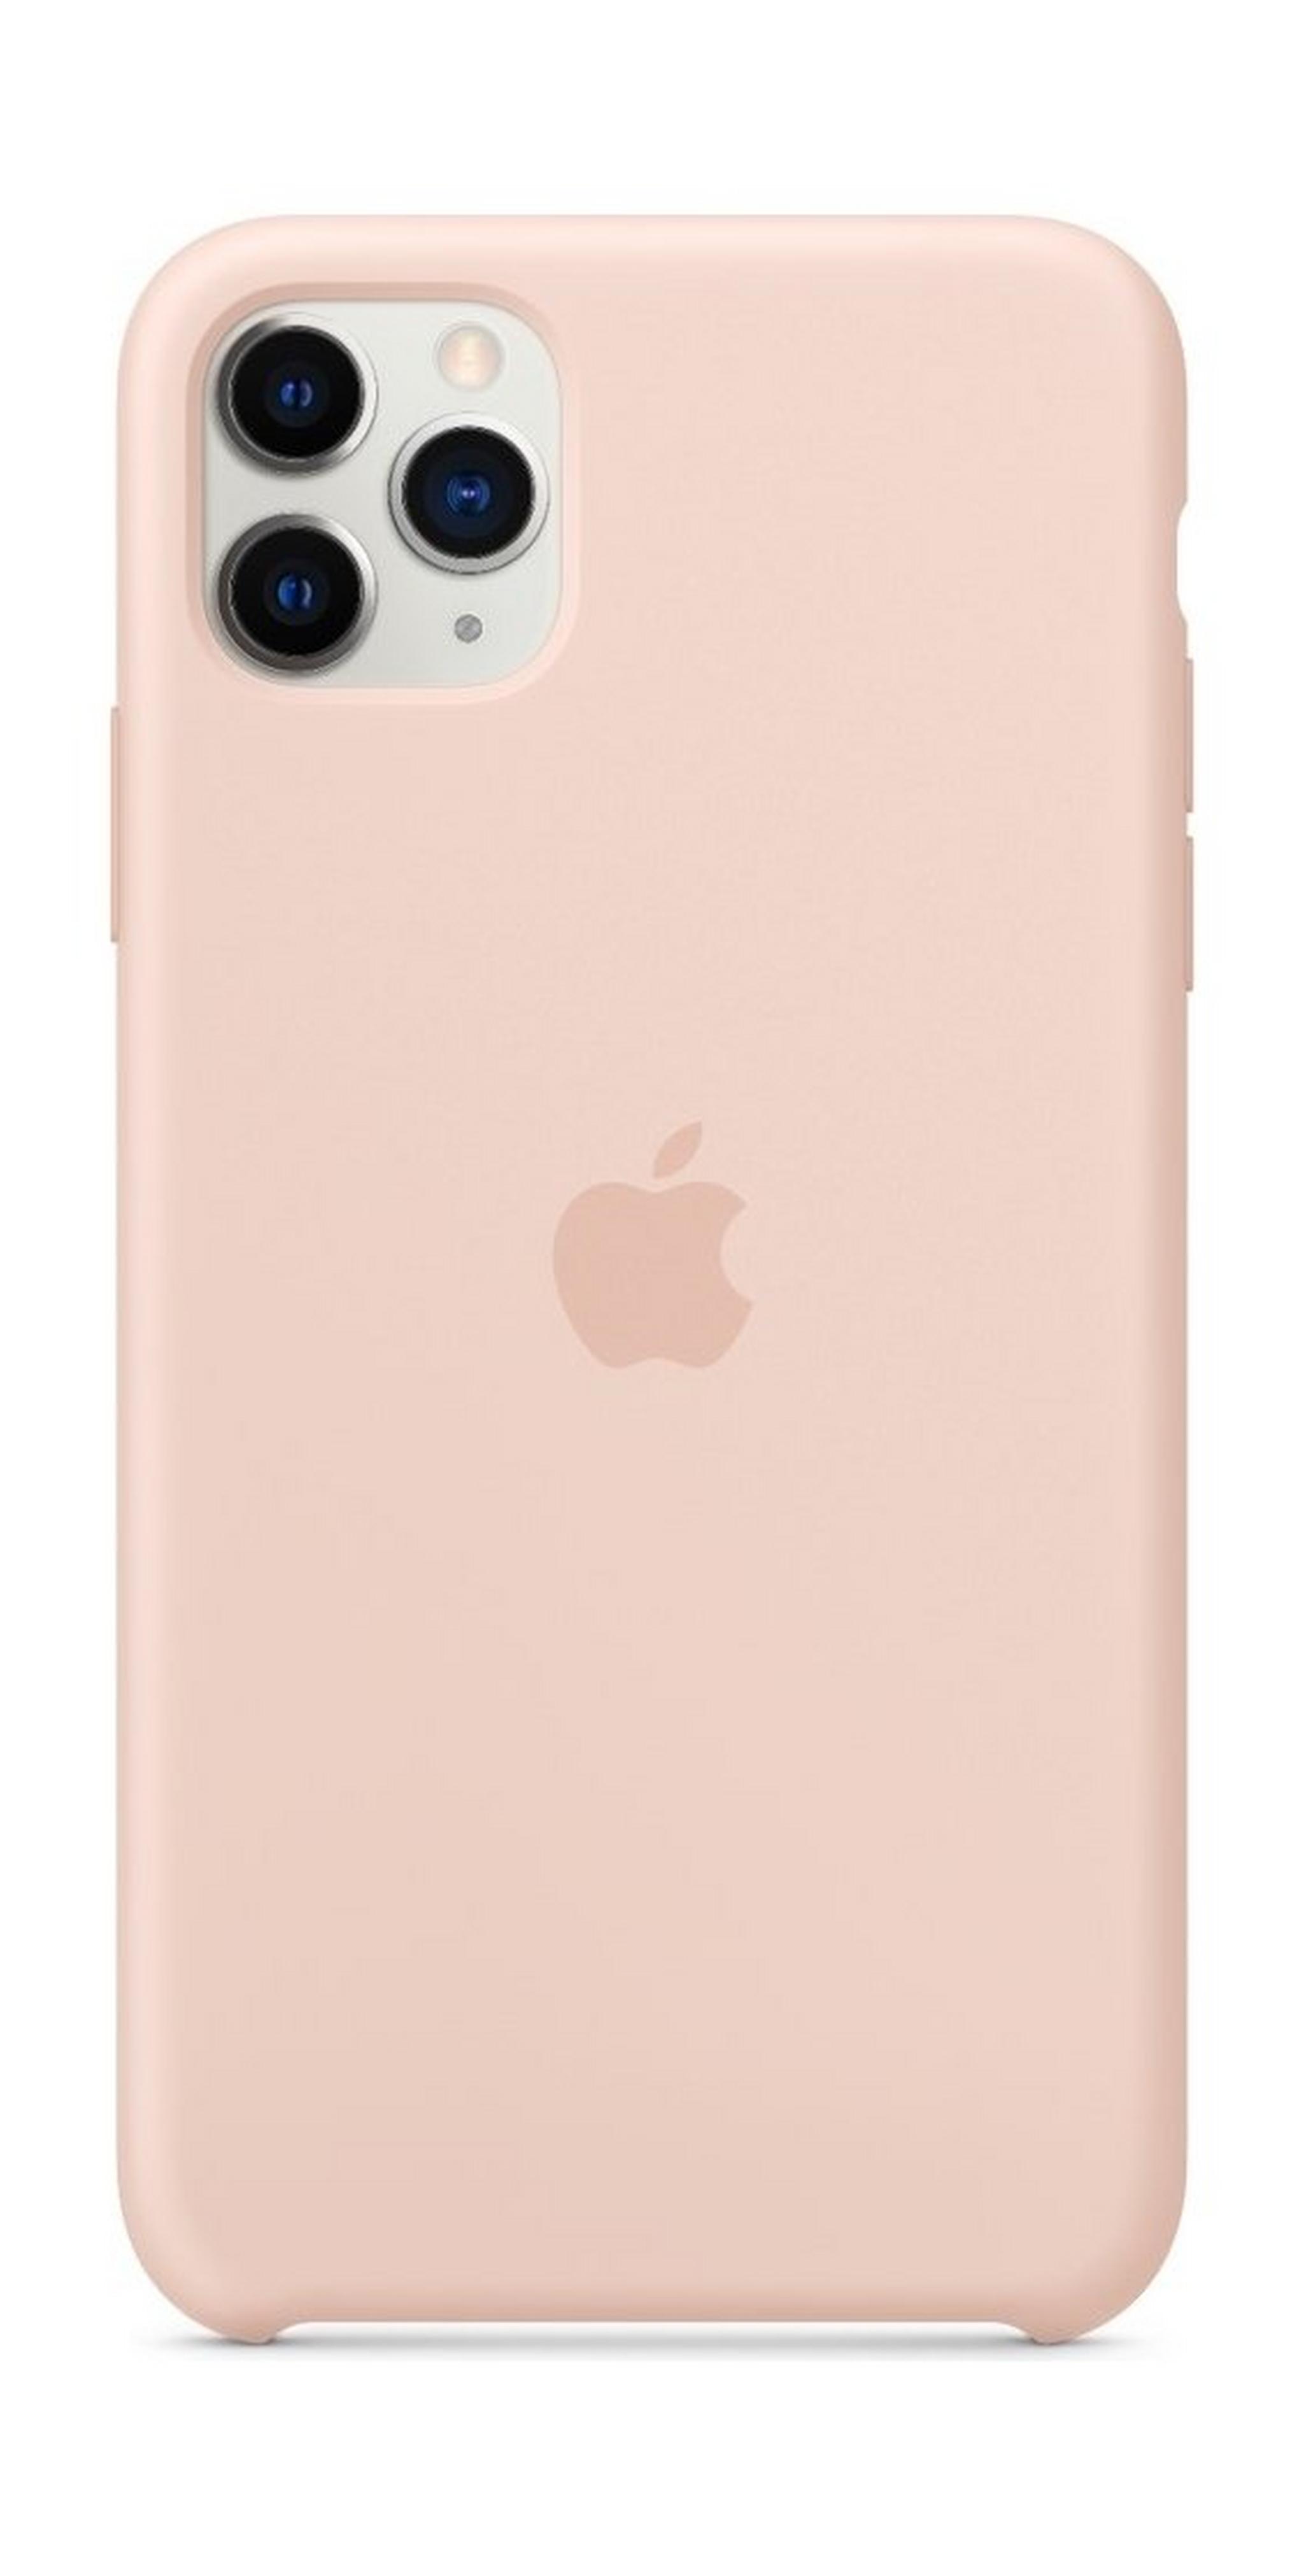 Apple iPhone 11 Pro Max Silicon Case - Pink Sand